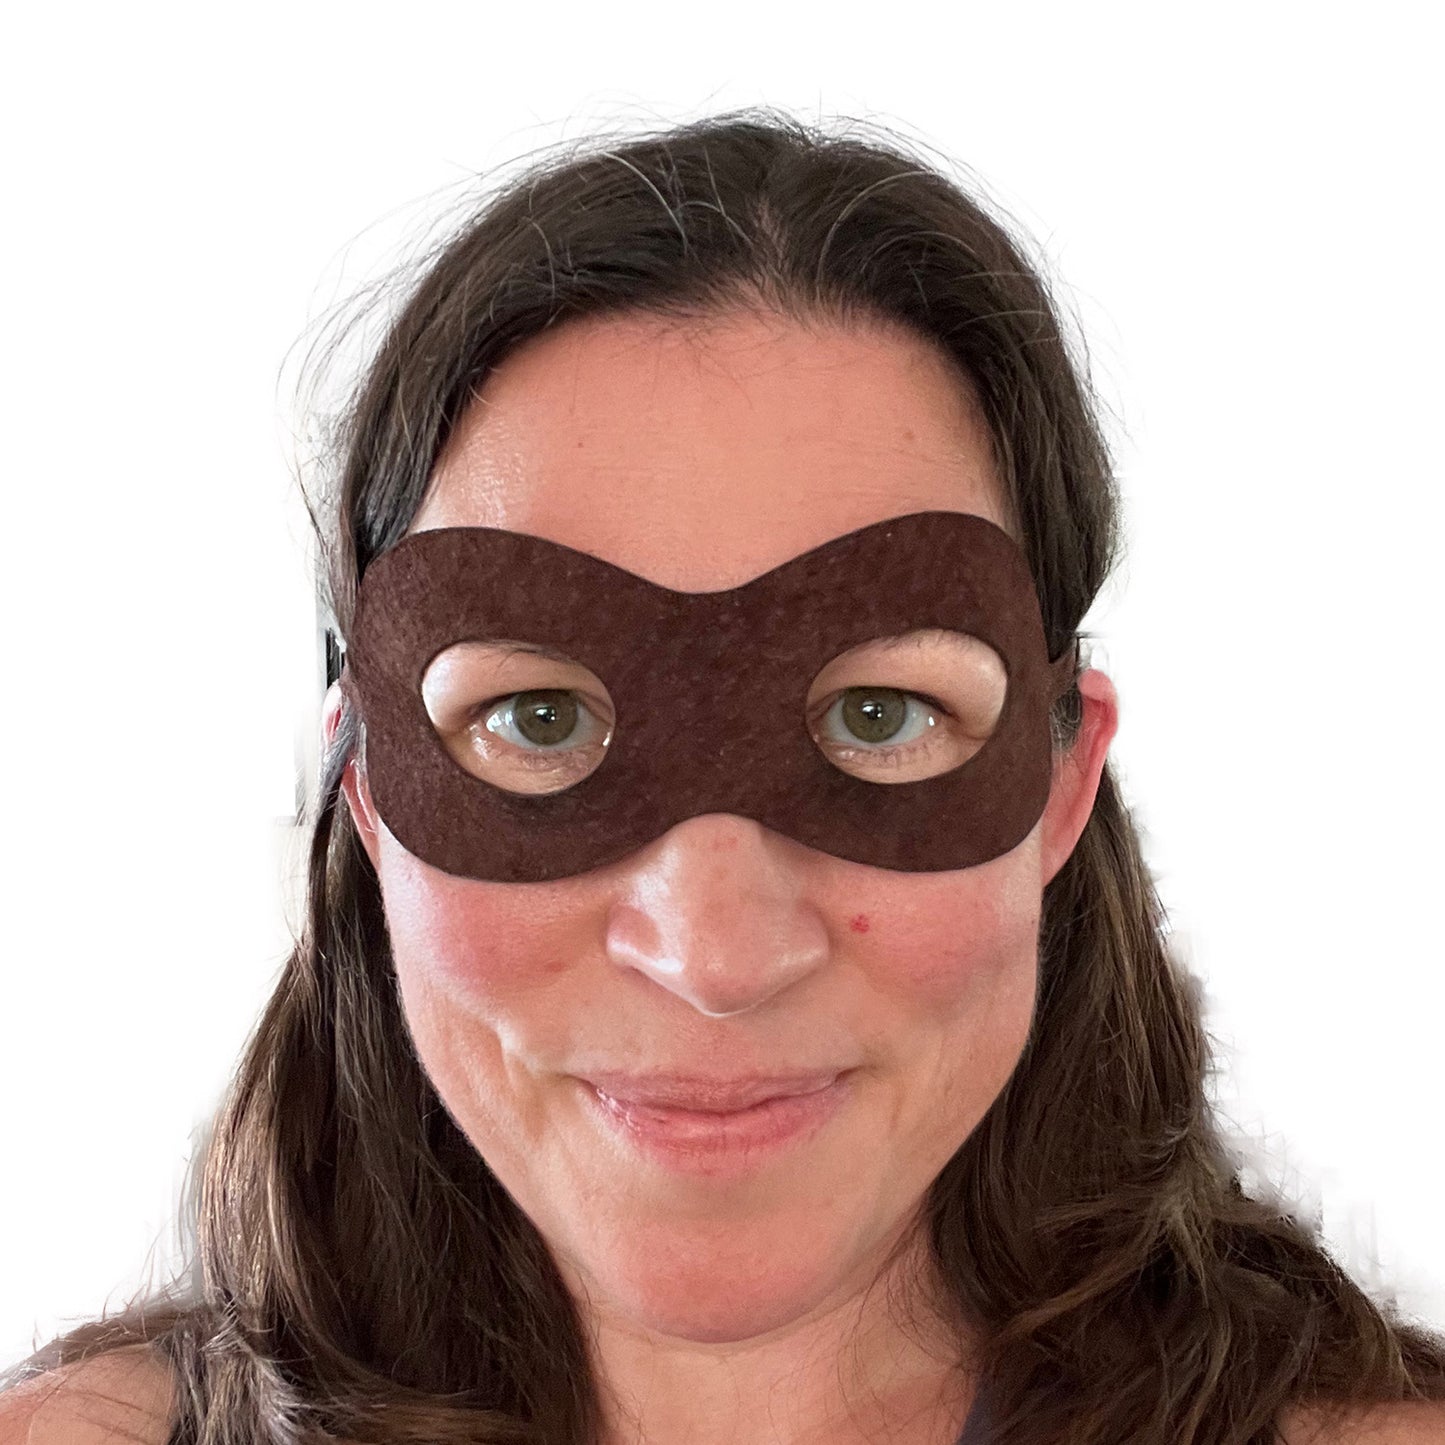 Pirate Face Mask: A Swashbuckler's Essential